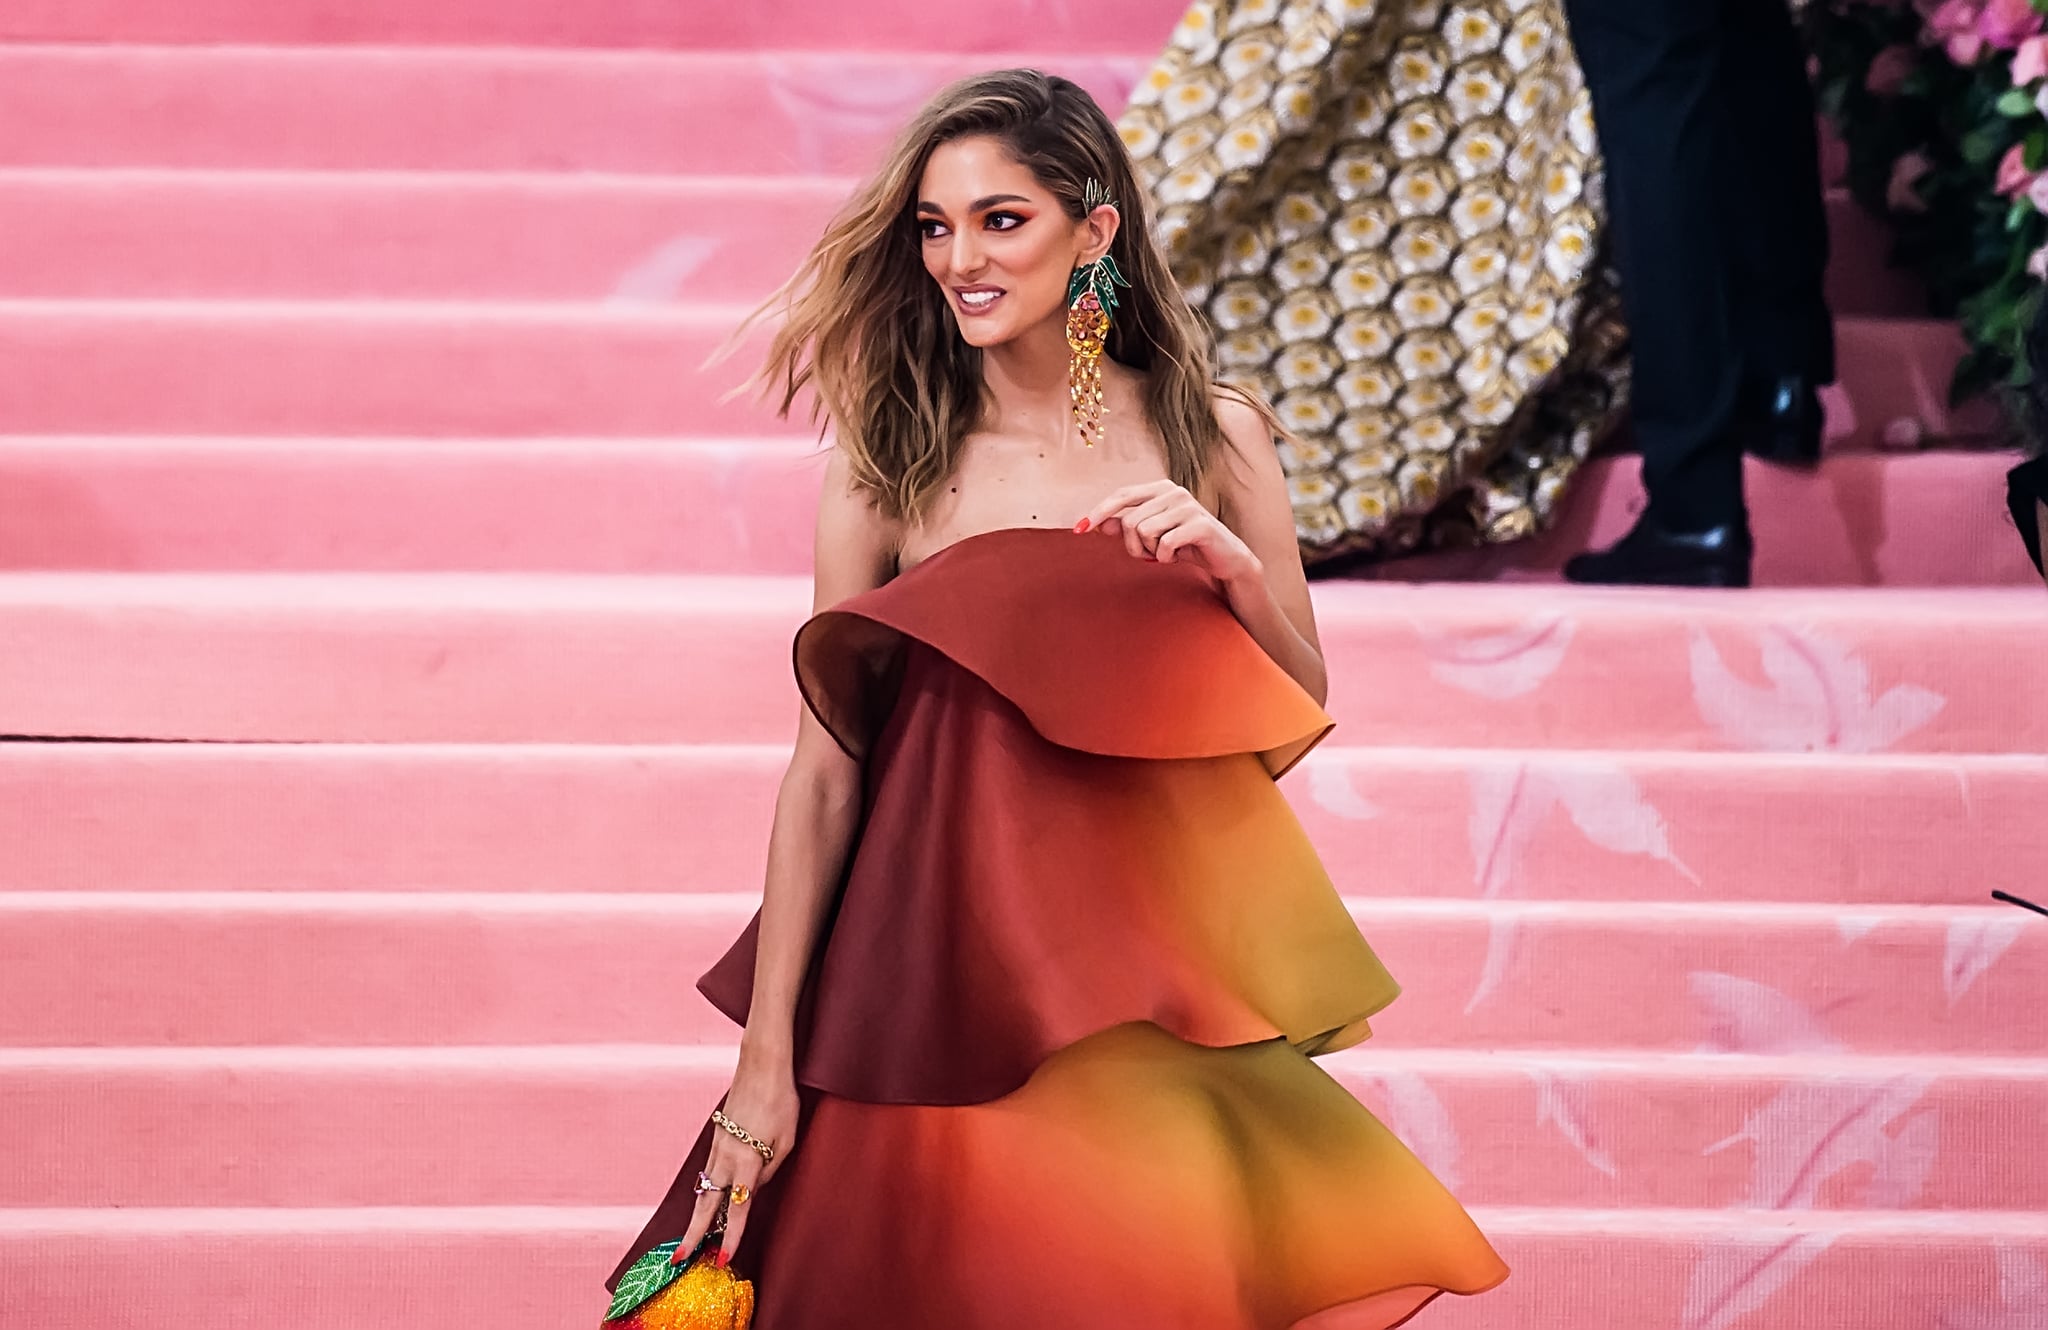 Sofia Sanchez de Betak Wearing Mango at the Met Gala | This Stunning Met Gala Dress Is Being Auctioned to Help Doctors in the Fight Against COVID-19 | POPSUGAR Fashion Photo